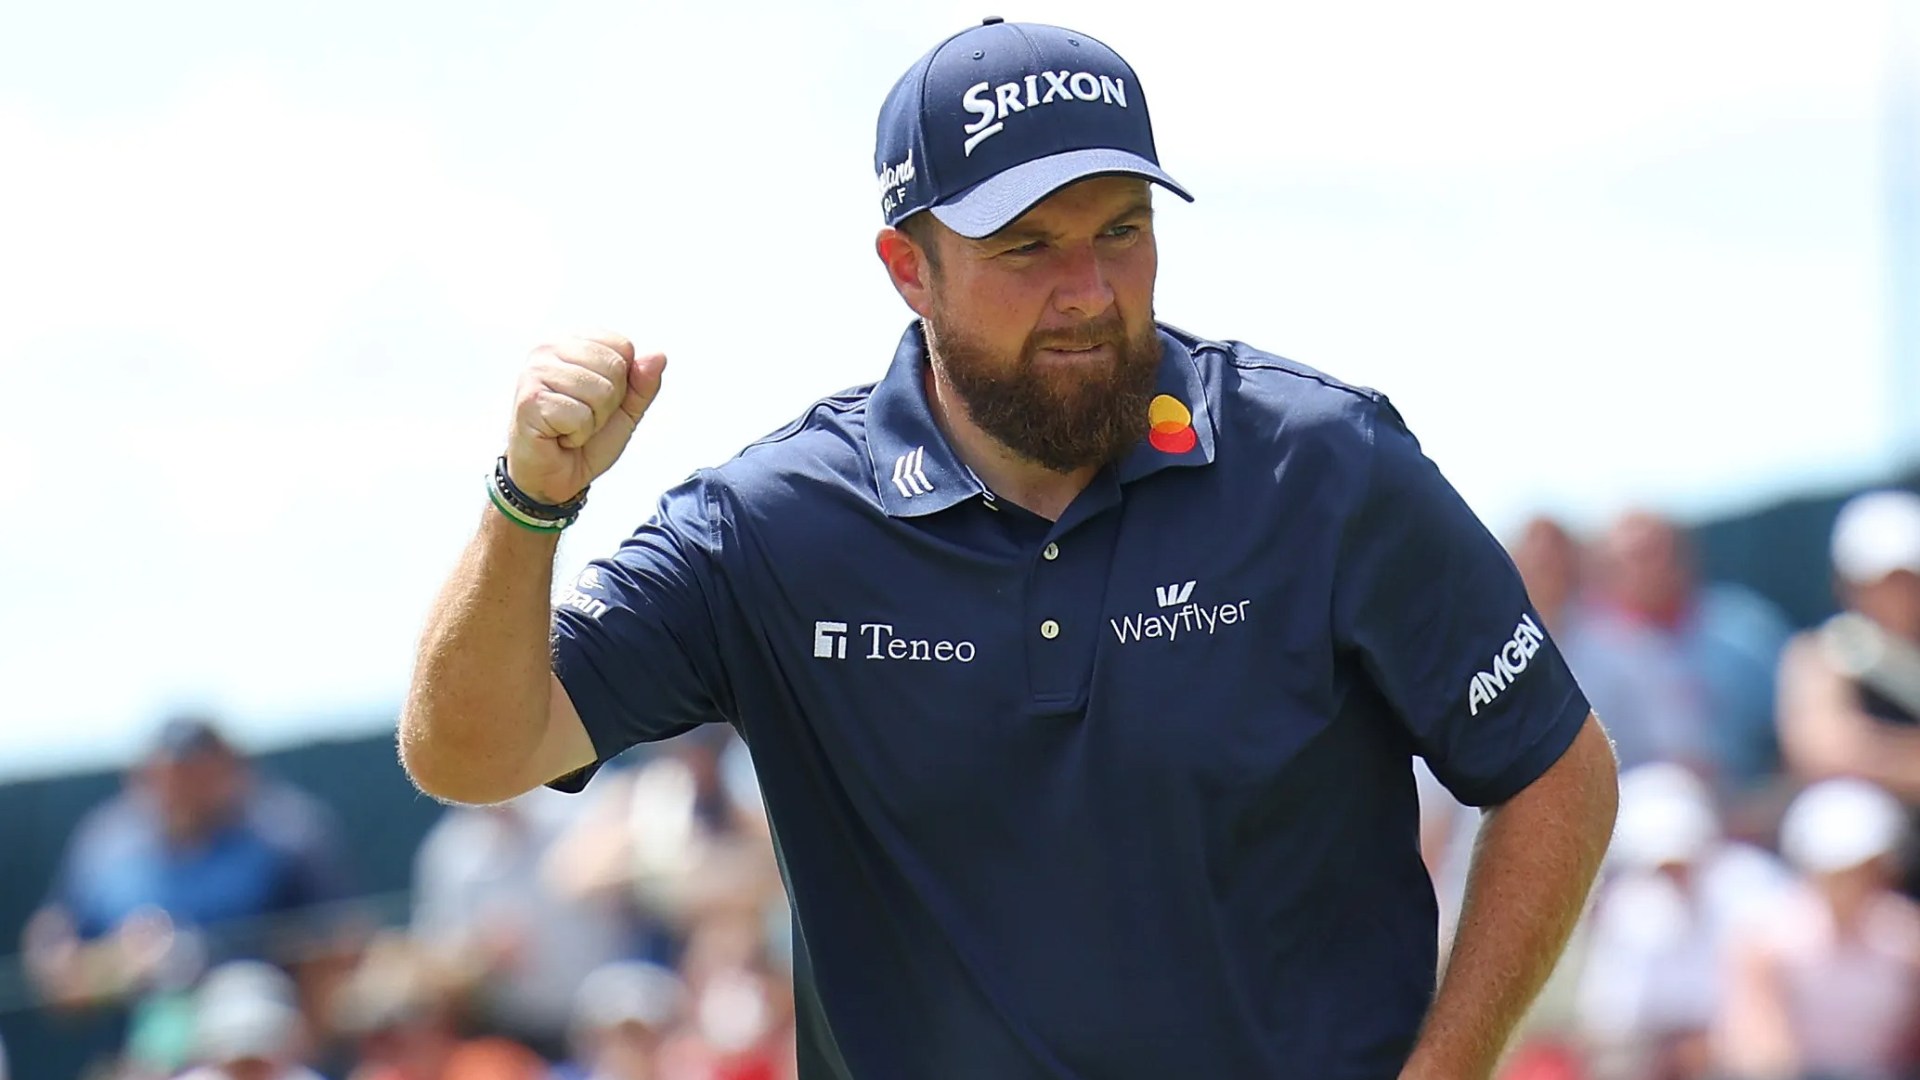 Shane Lowry equals historic major & USPGA Championship record as he hunts down leaders in SENSATIONAL style at Valhalla [Video]